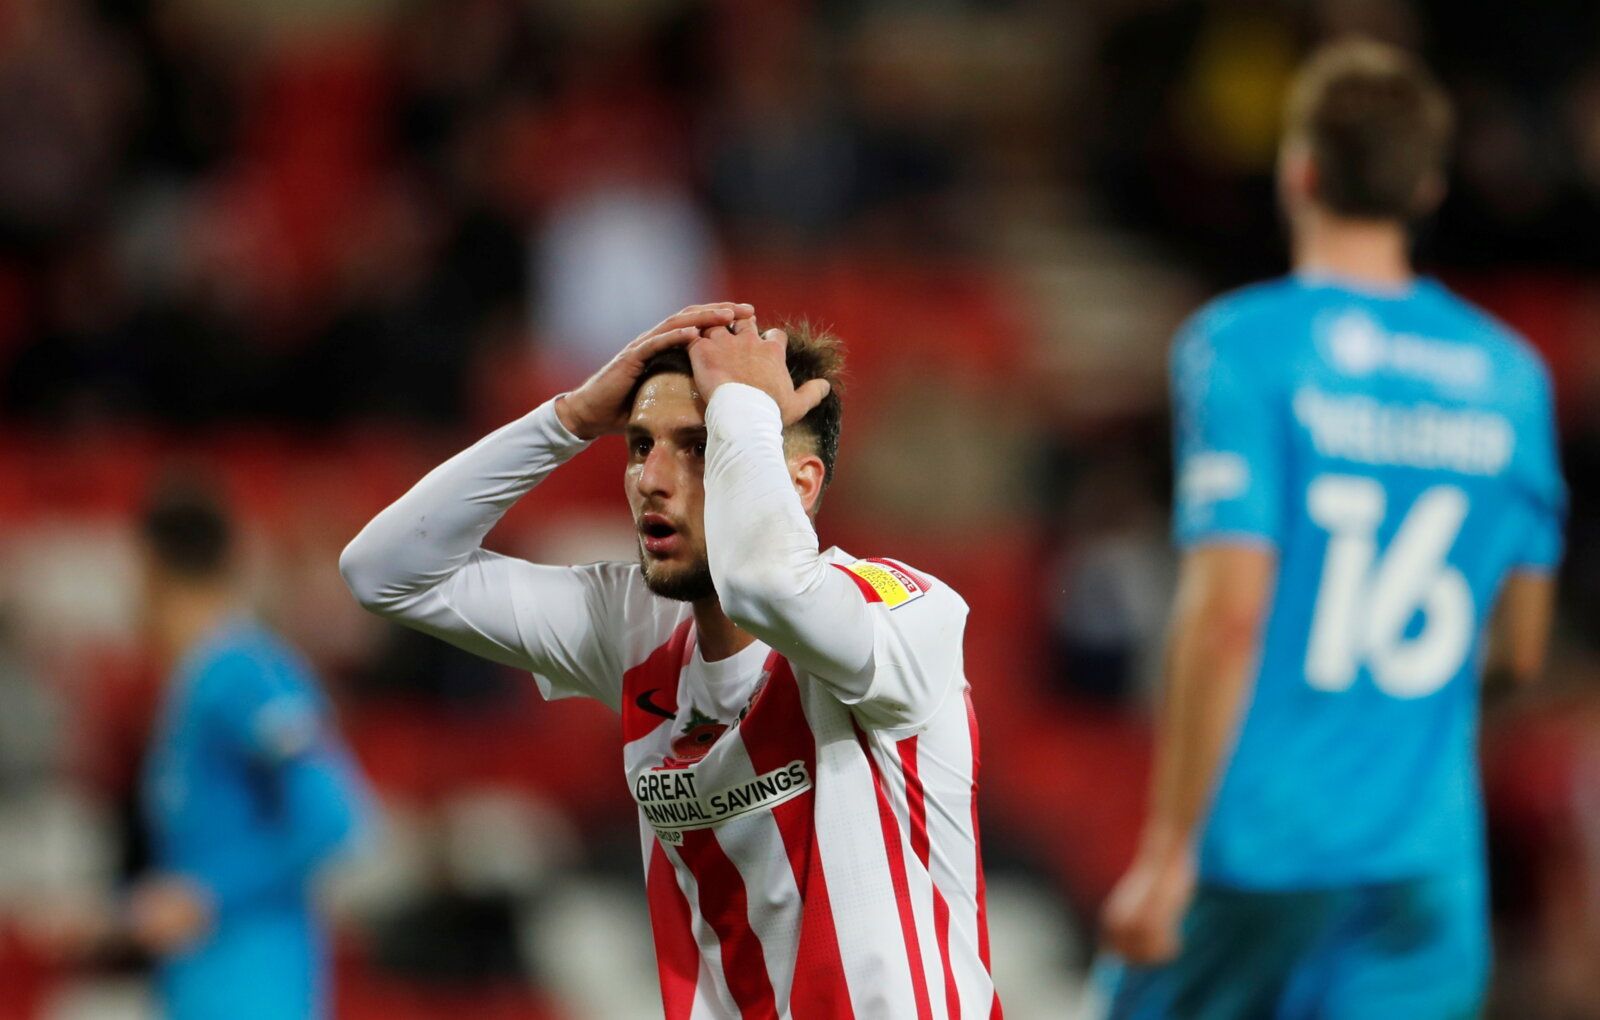 Soccer Football - EFL Trophy - Group Stage - Sunderland v Bradford City - Stadium of Light, Sunderland, Britain - November 9, 2021  Sunderland’s Leon Dajaku looks dejected    Action Images/Lee Smith  EDITORIAL USE ONLY. No use with unauthorized audio, video, data, fixture lists, club/league logos or 